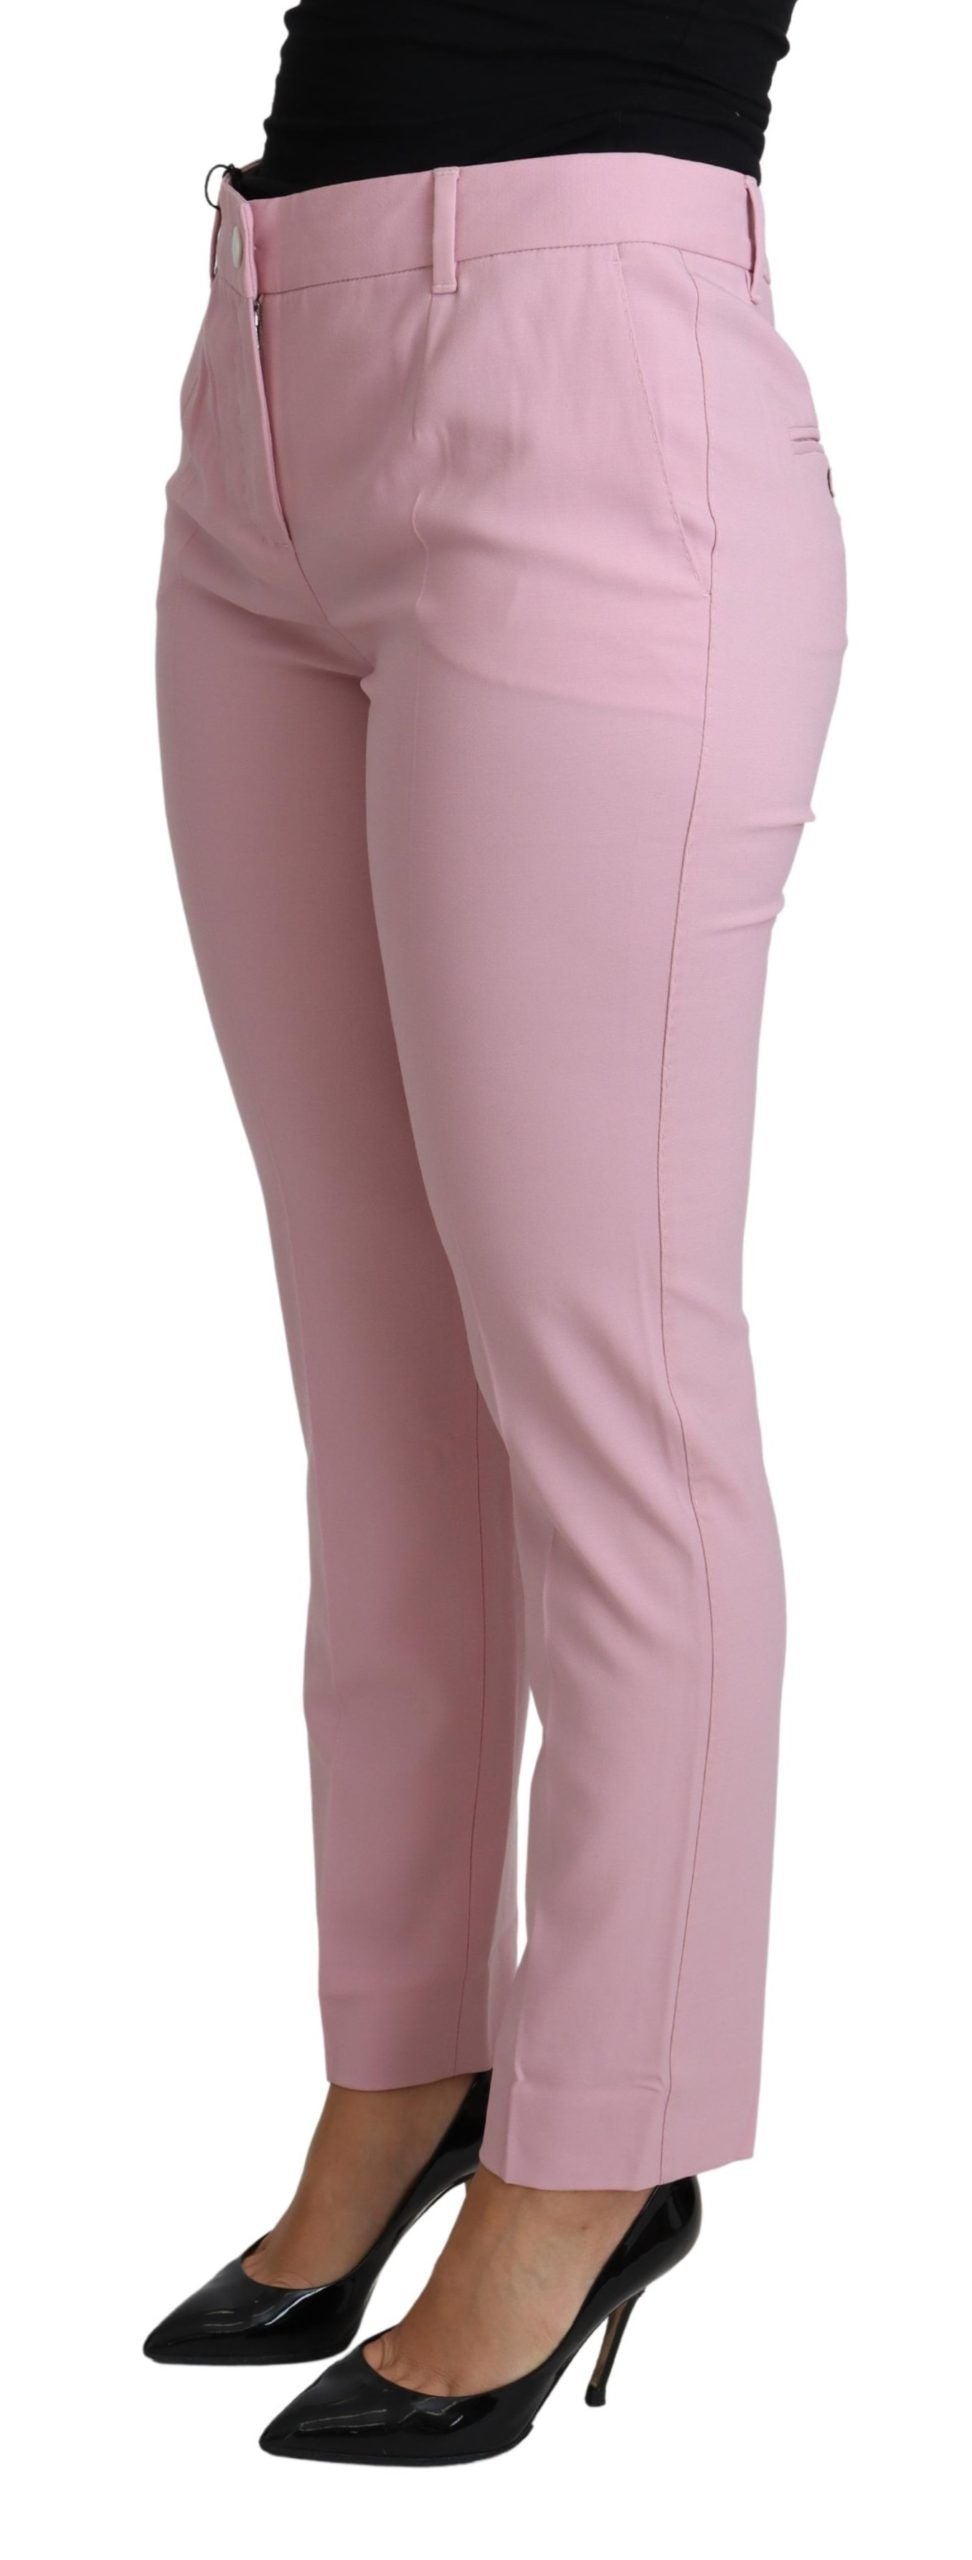 Dolce & Gabbana Pink Virgin Wool Stretch Tapered Trouser Pants